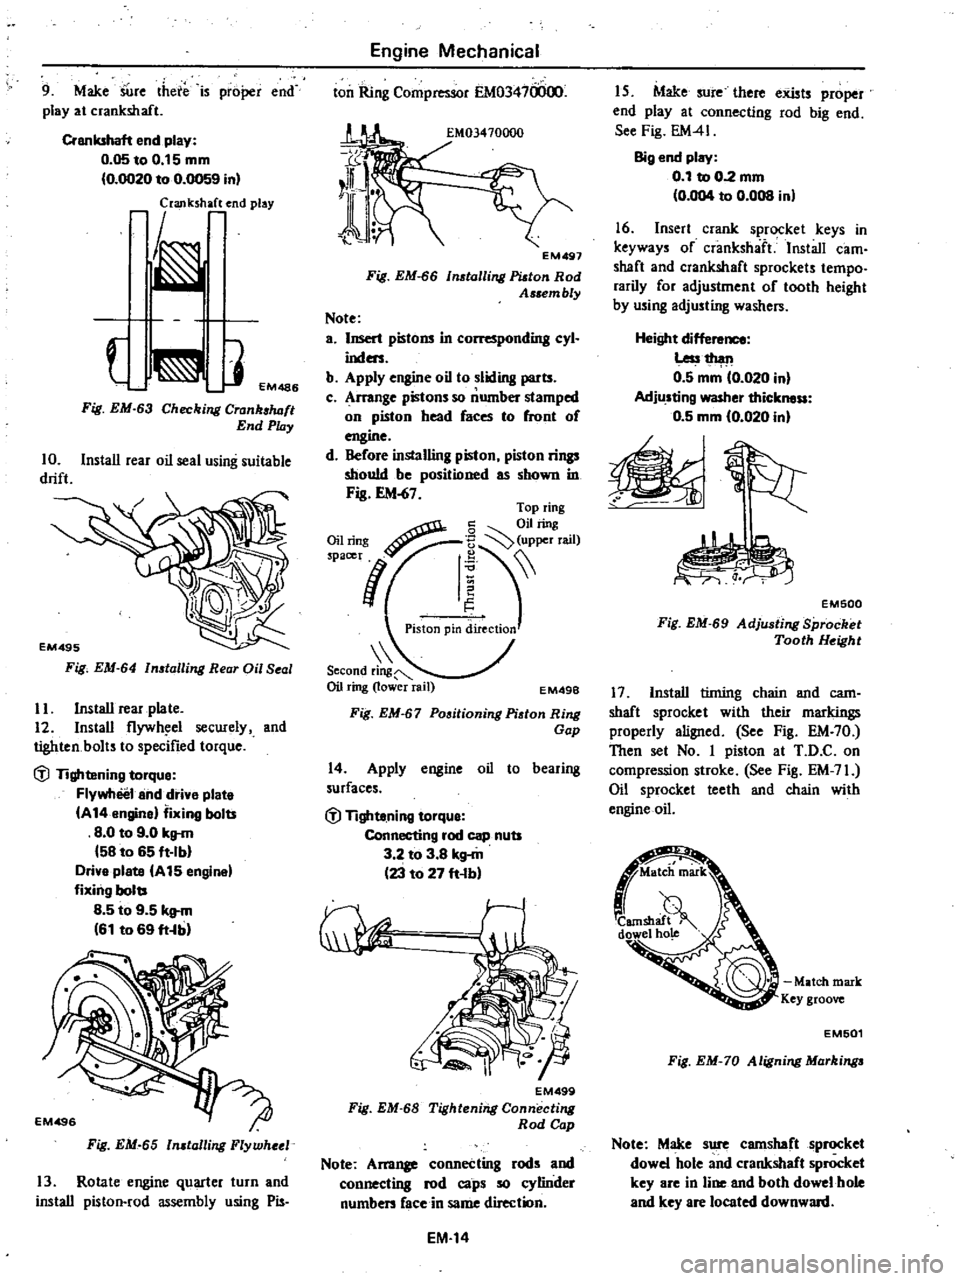 DATSUN 210 1979 Owners Manual 
9 
Make 
SUre 
there 
is

proper 
end

play 
at

crankshaft

Crankshaft

end

play

0 
05toO 
15mm

0 
OO20 
to 
0

0059 
in

laJlk 
h 
end

play

J

EM486

Fig 
EM

63

Checking 
Crank

luJft

End

